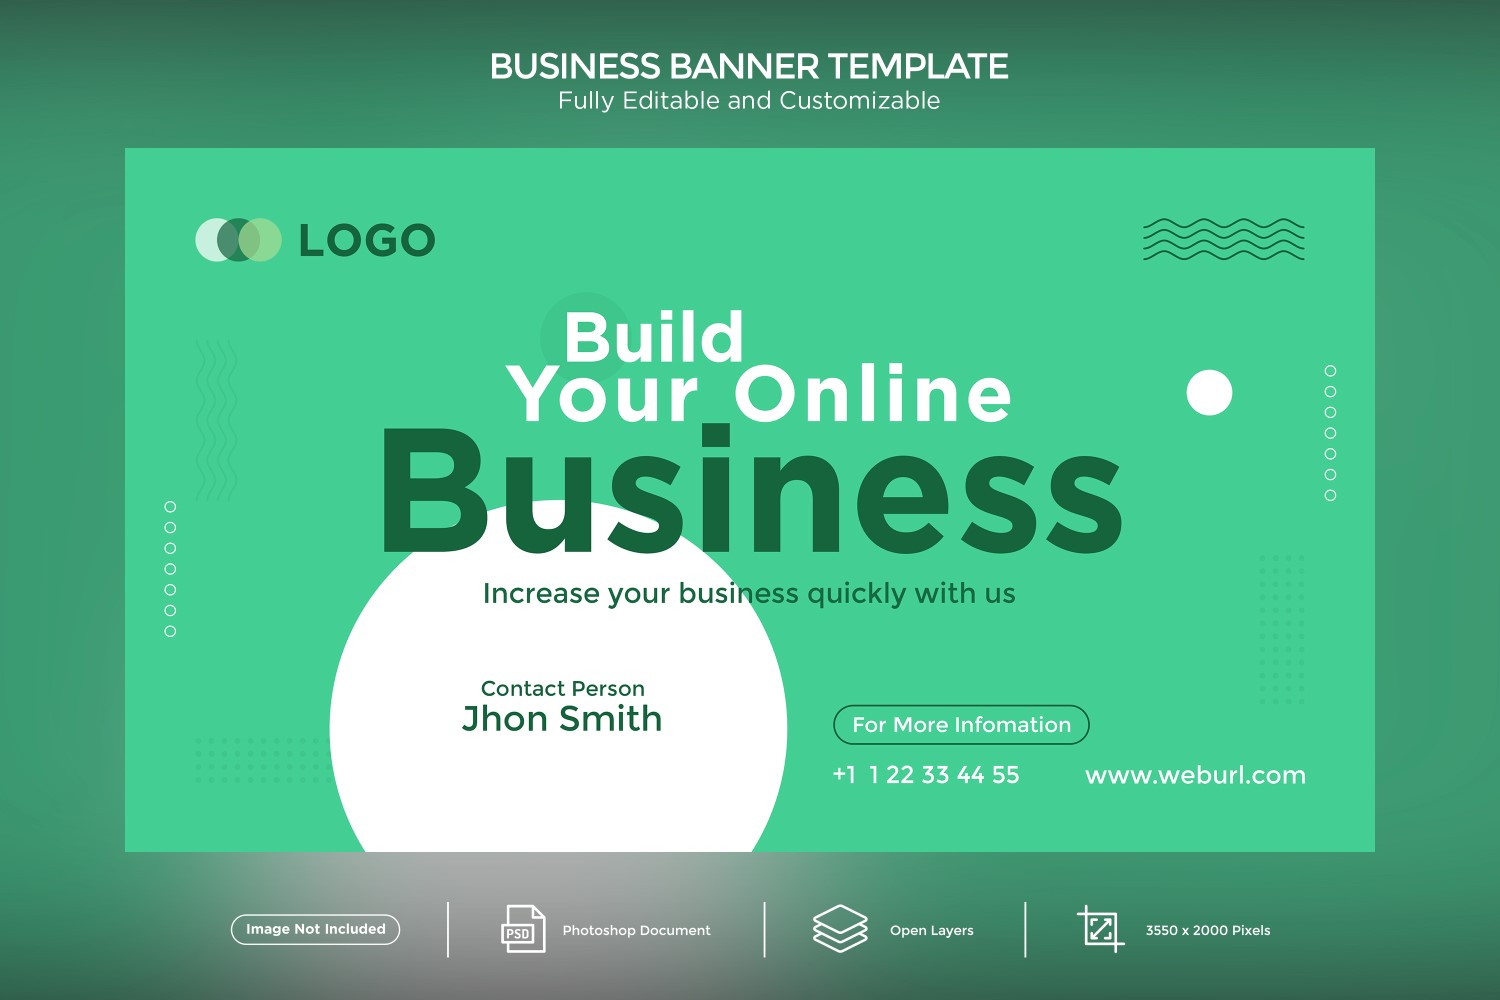 Build Your Online Business Banner A Green and White Color  Design Template